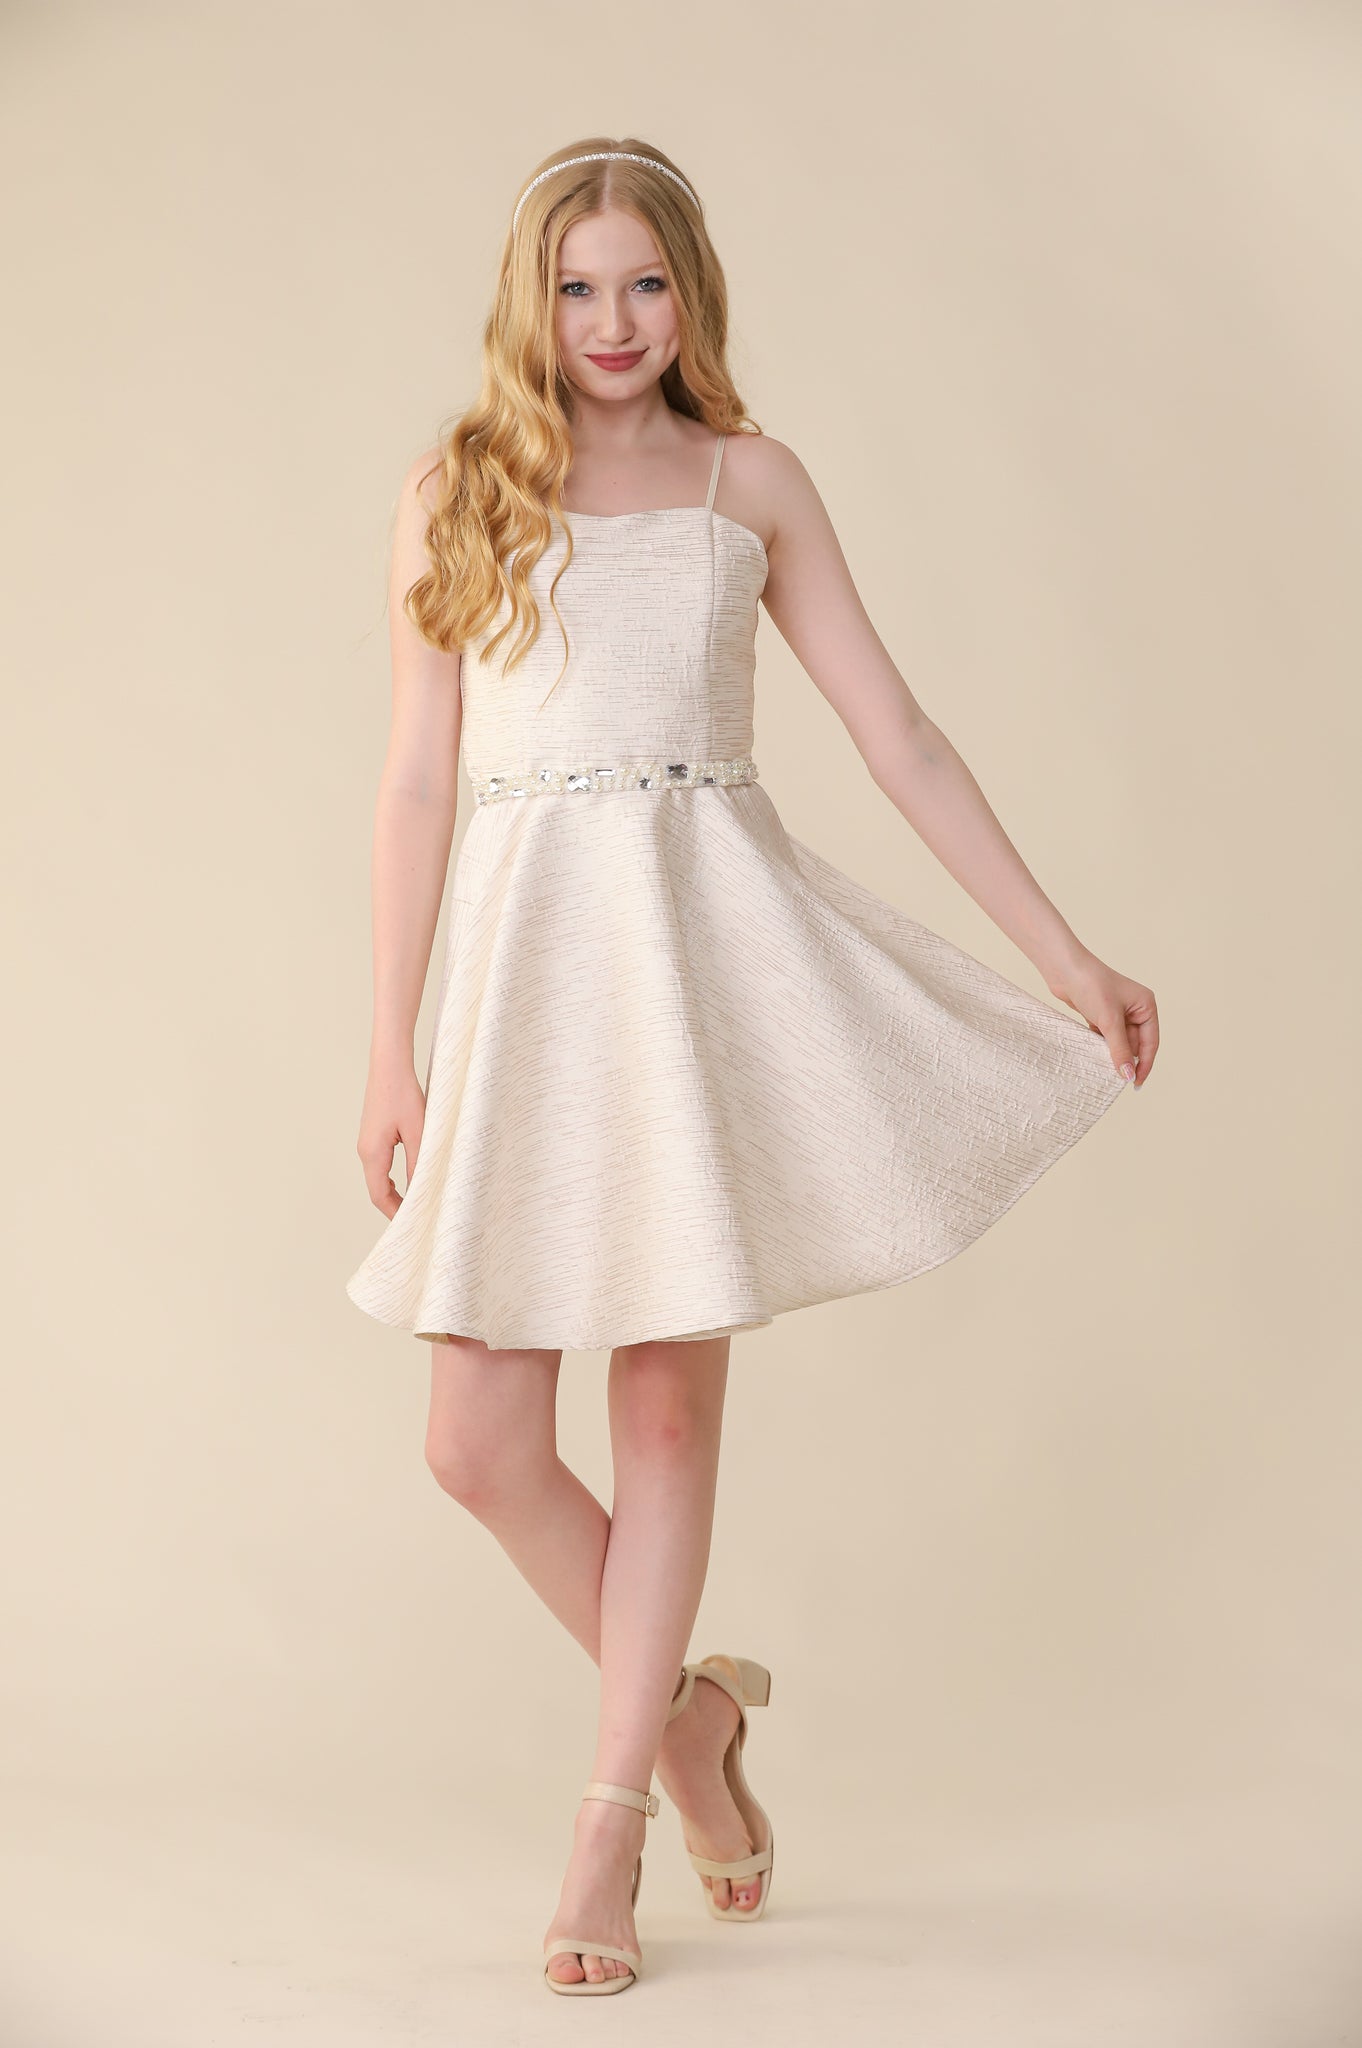 Blonde girl in ivory jacquard dress with headband.